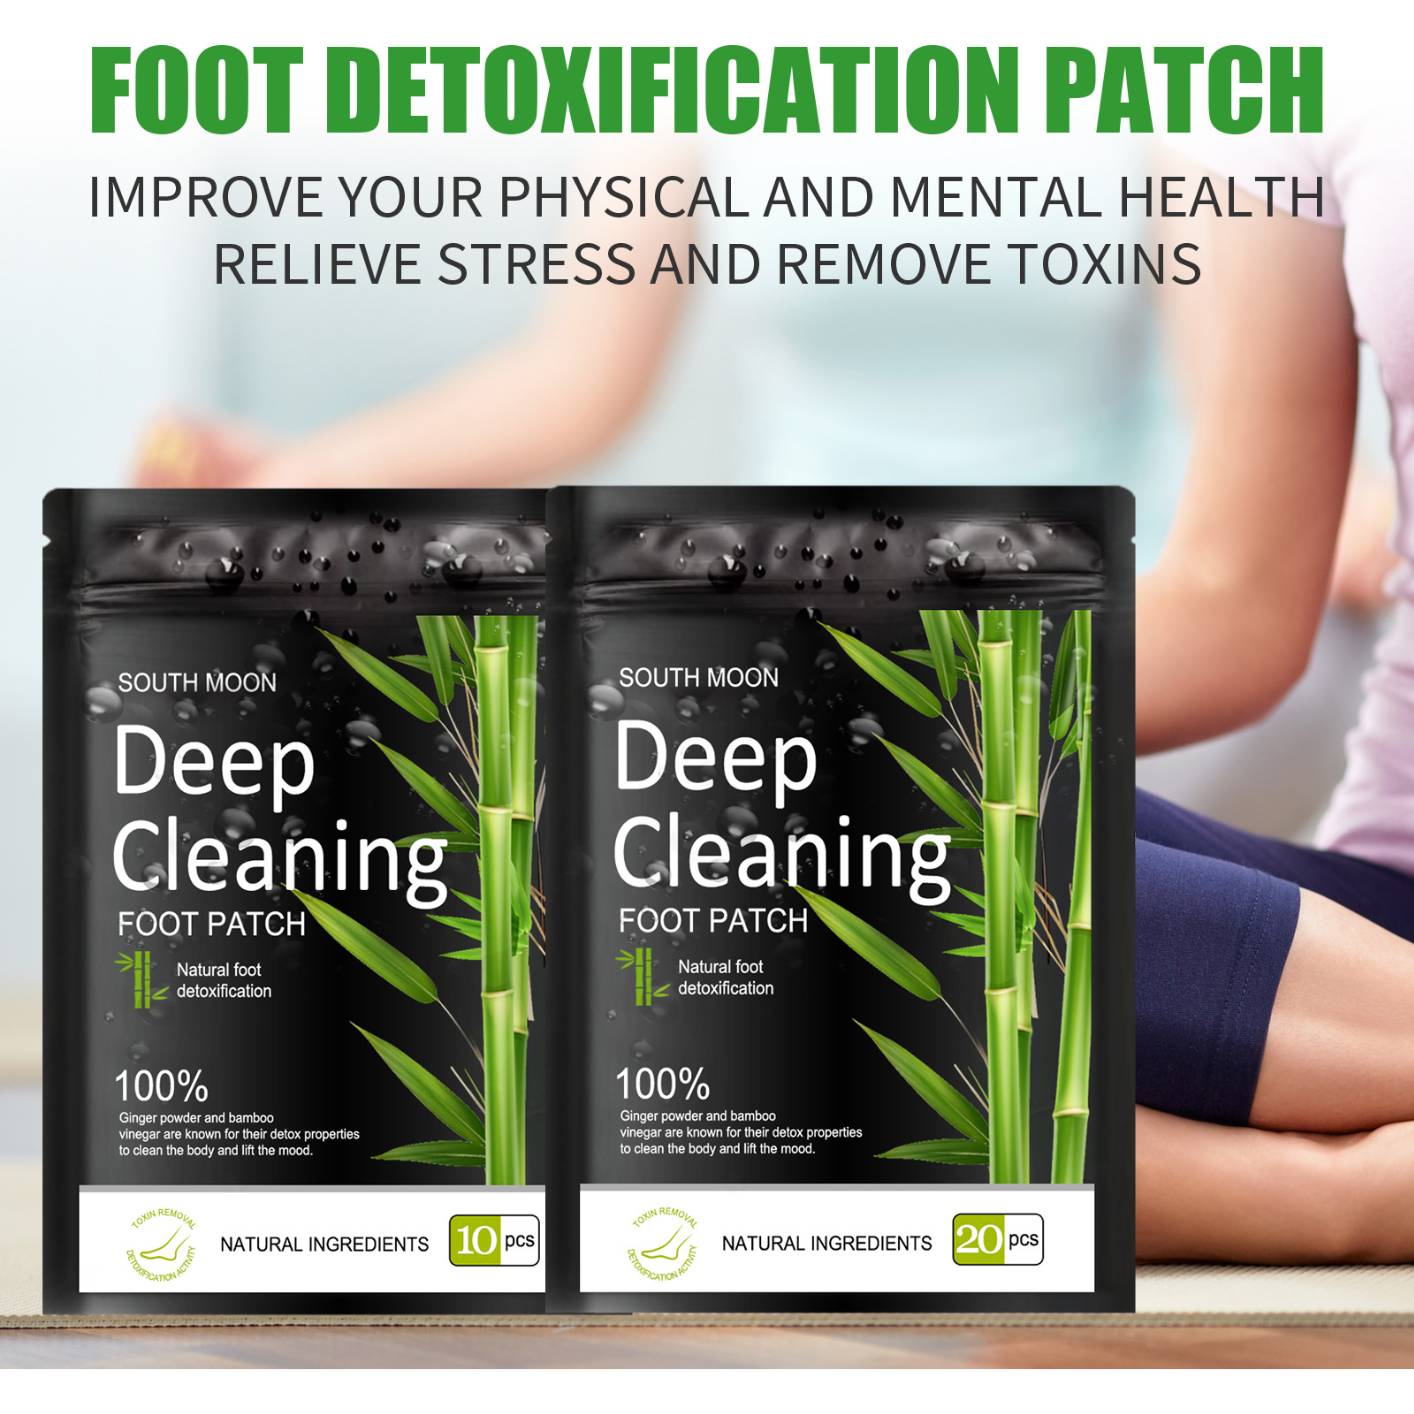 Deep Cleansing Foot Pads for Stress Relief, Better Sleep & Foot Care | Premium Japanese Organic Foot Patches with Ginger Powder | Natural Effective Foot Patch to Boost Energy